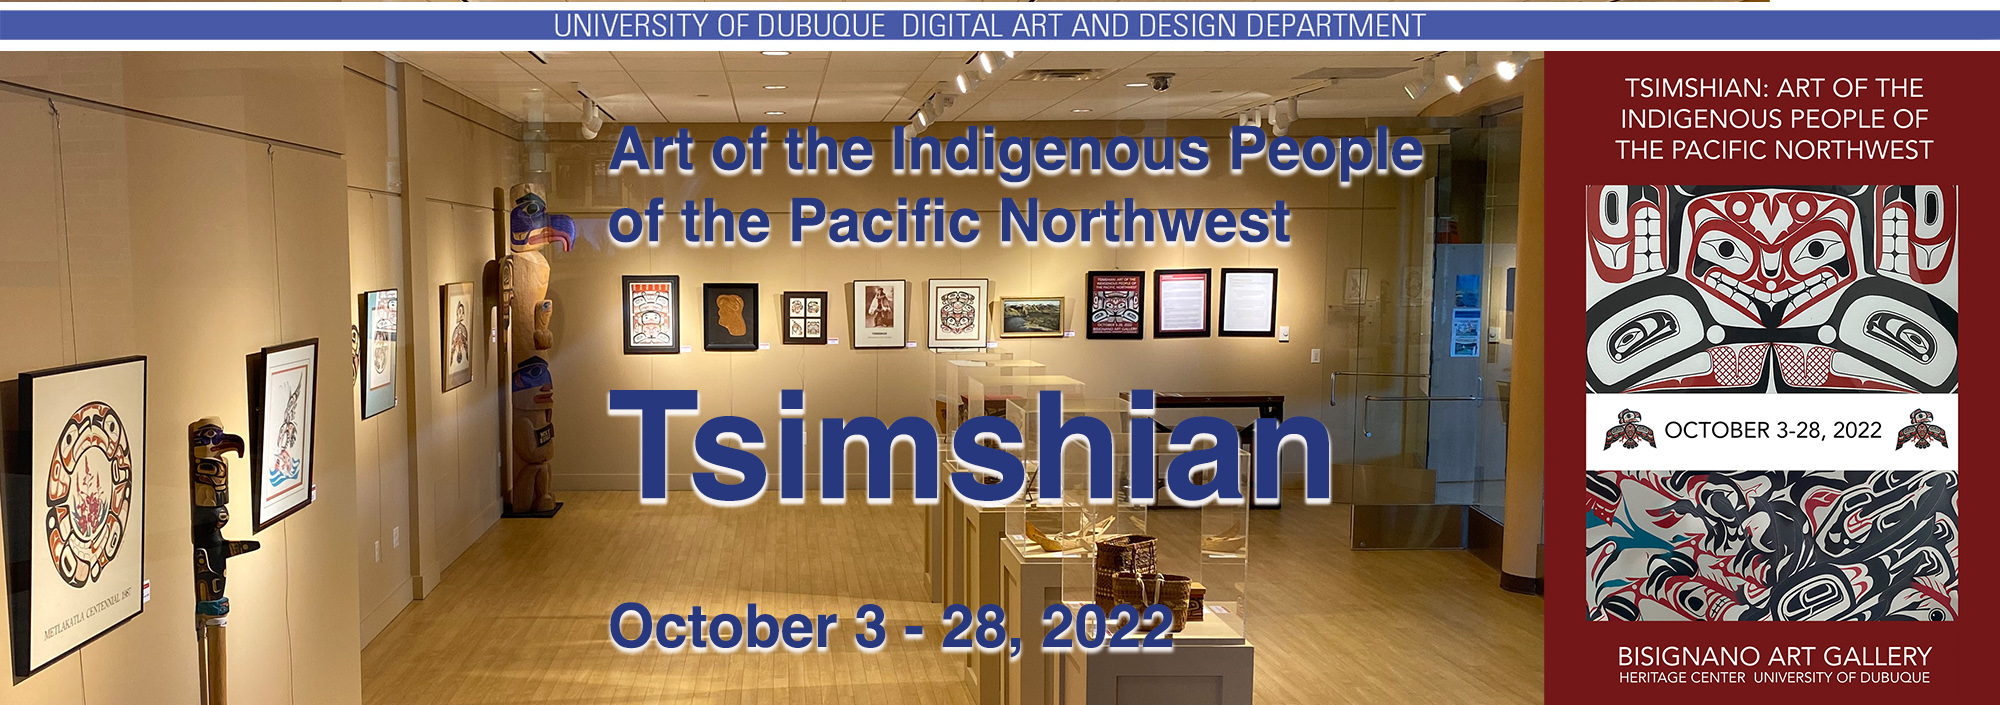 Tsimshian: Art of the Indigenous People of the Pacific Northwest